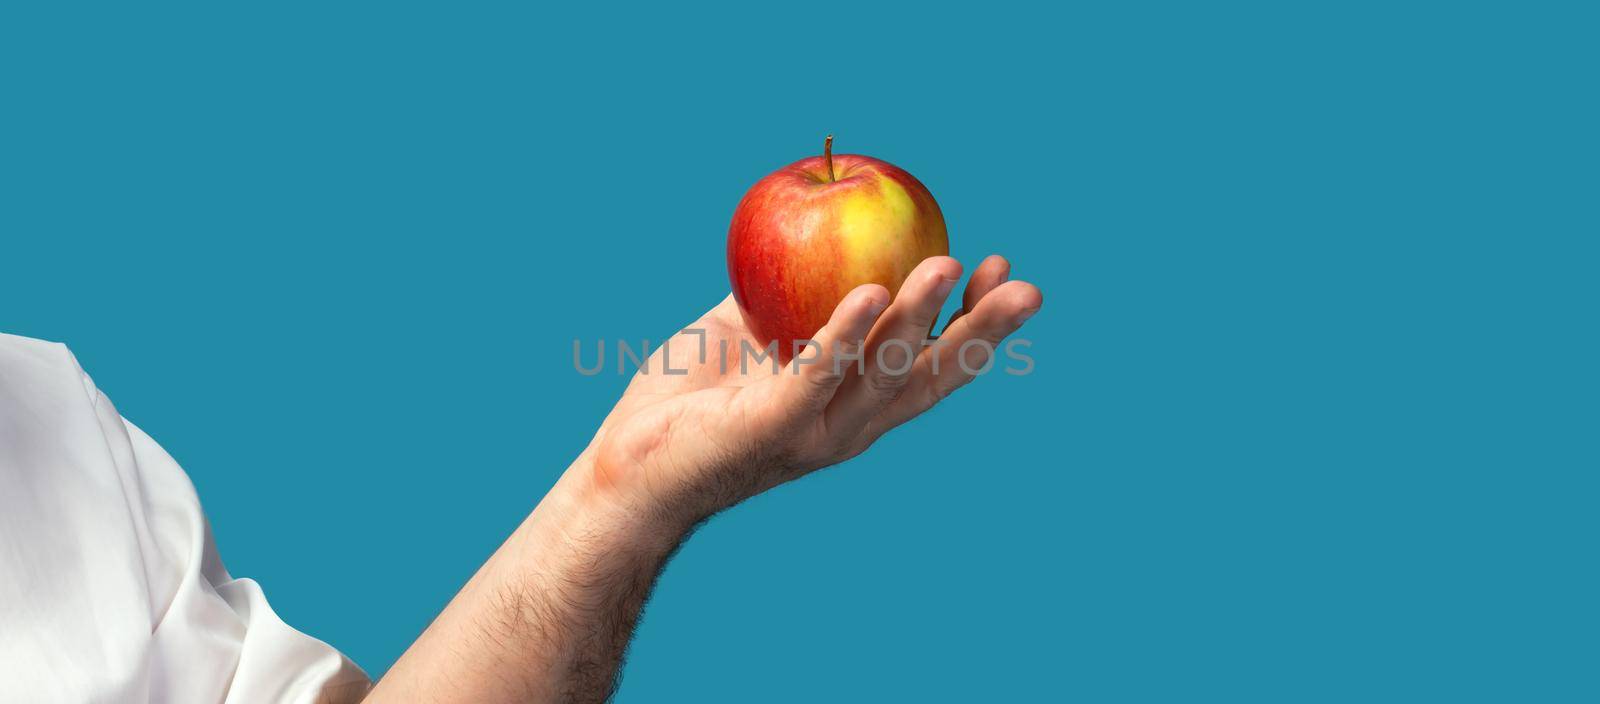 Healthy lifestyle and apple diet. Male hand with red apple on blue background